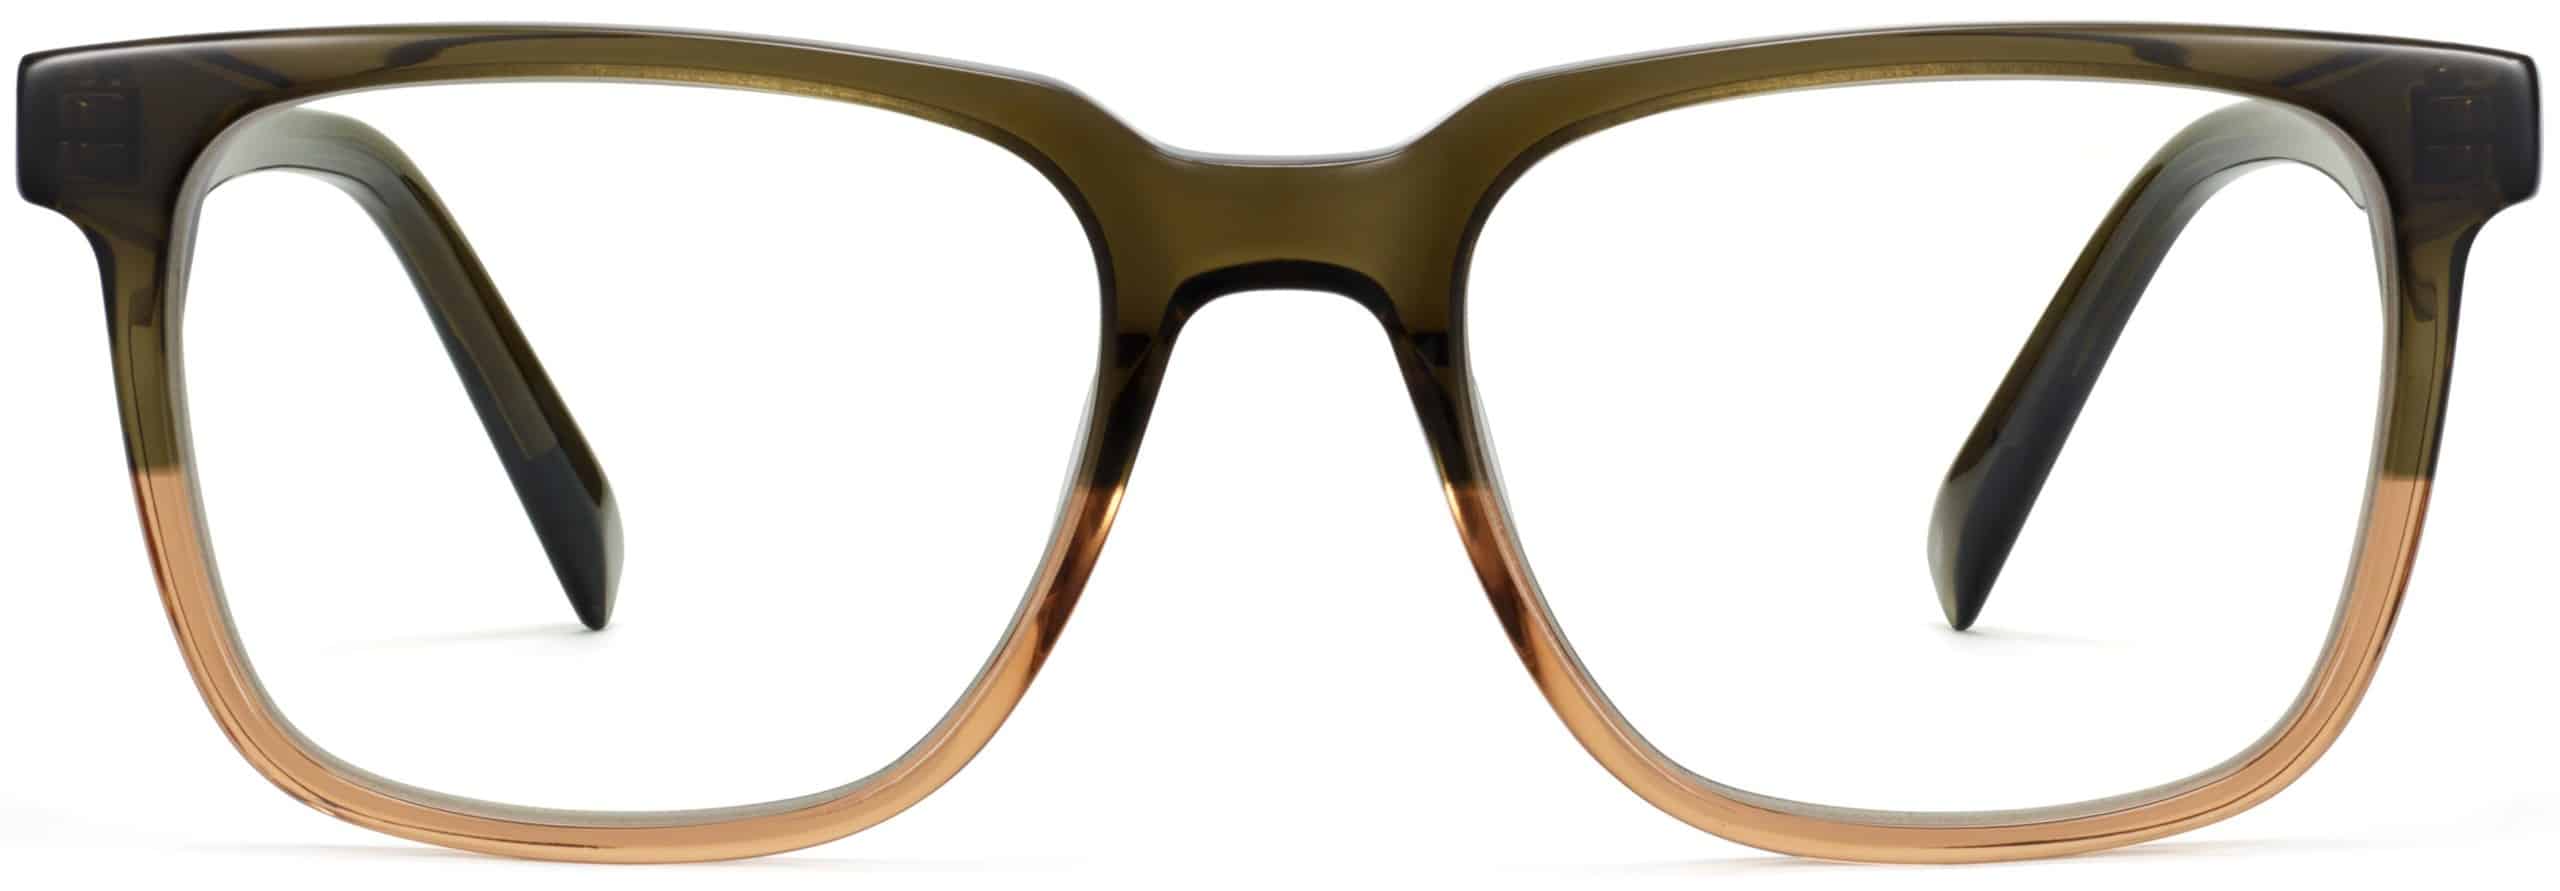 Chamberlain Eyeglasses In Depth Review Warby Parker 50 18 140 Eyewear Blogger Reviews